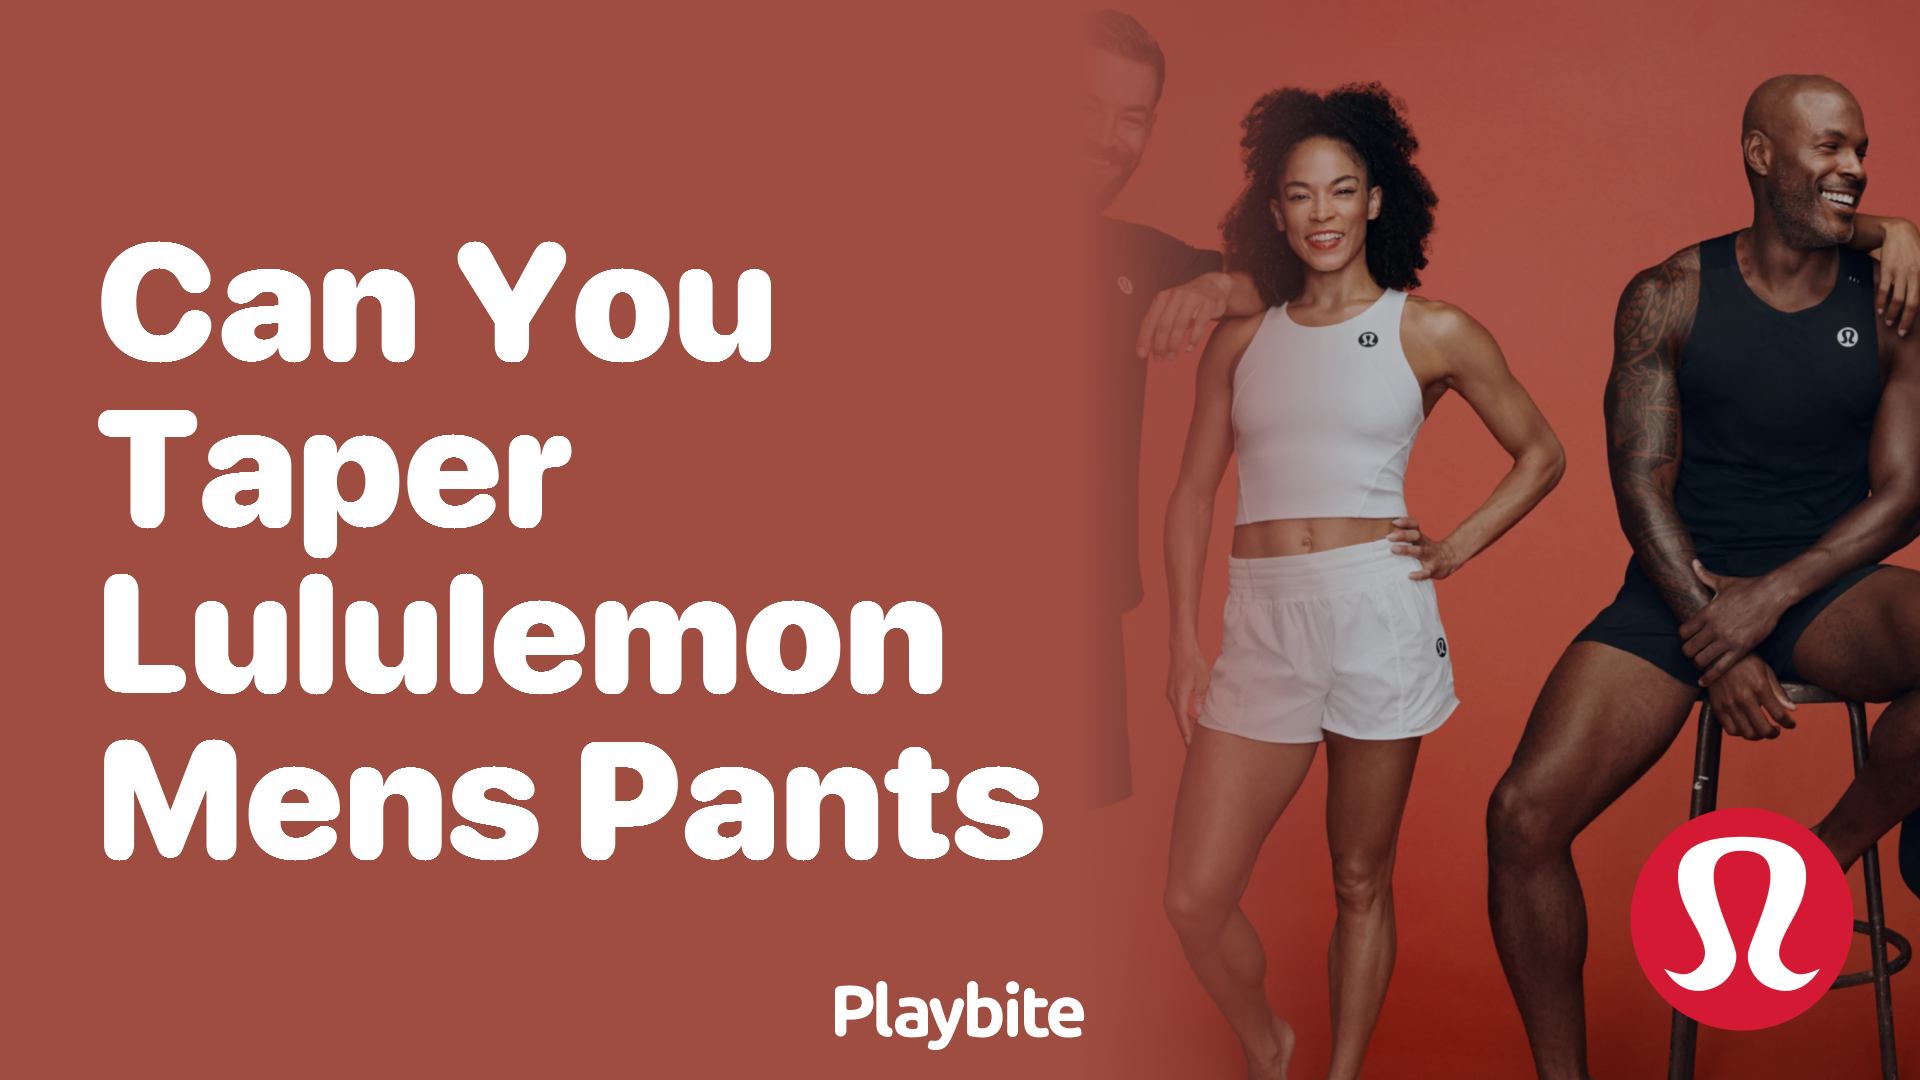 Does Lululemon Replace Leggings with Pilling? - Playbite